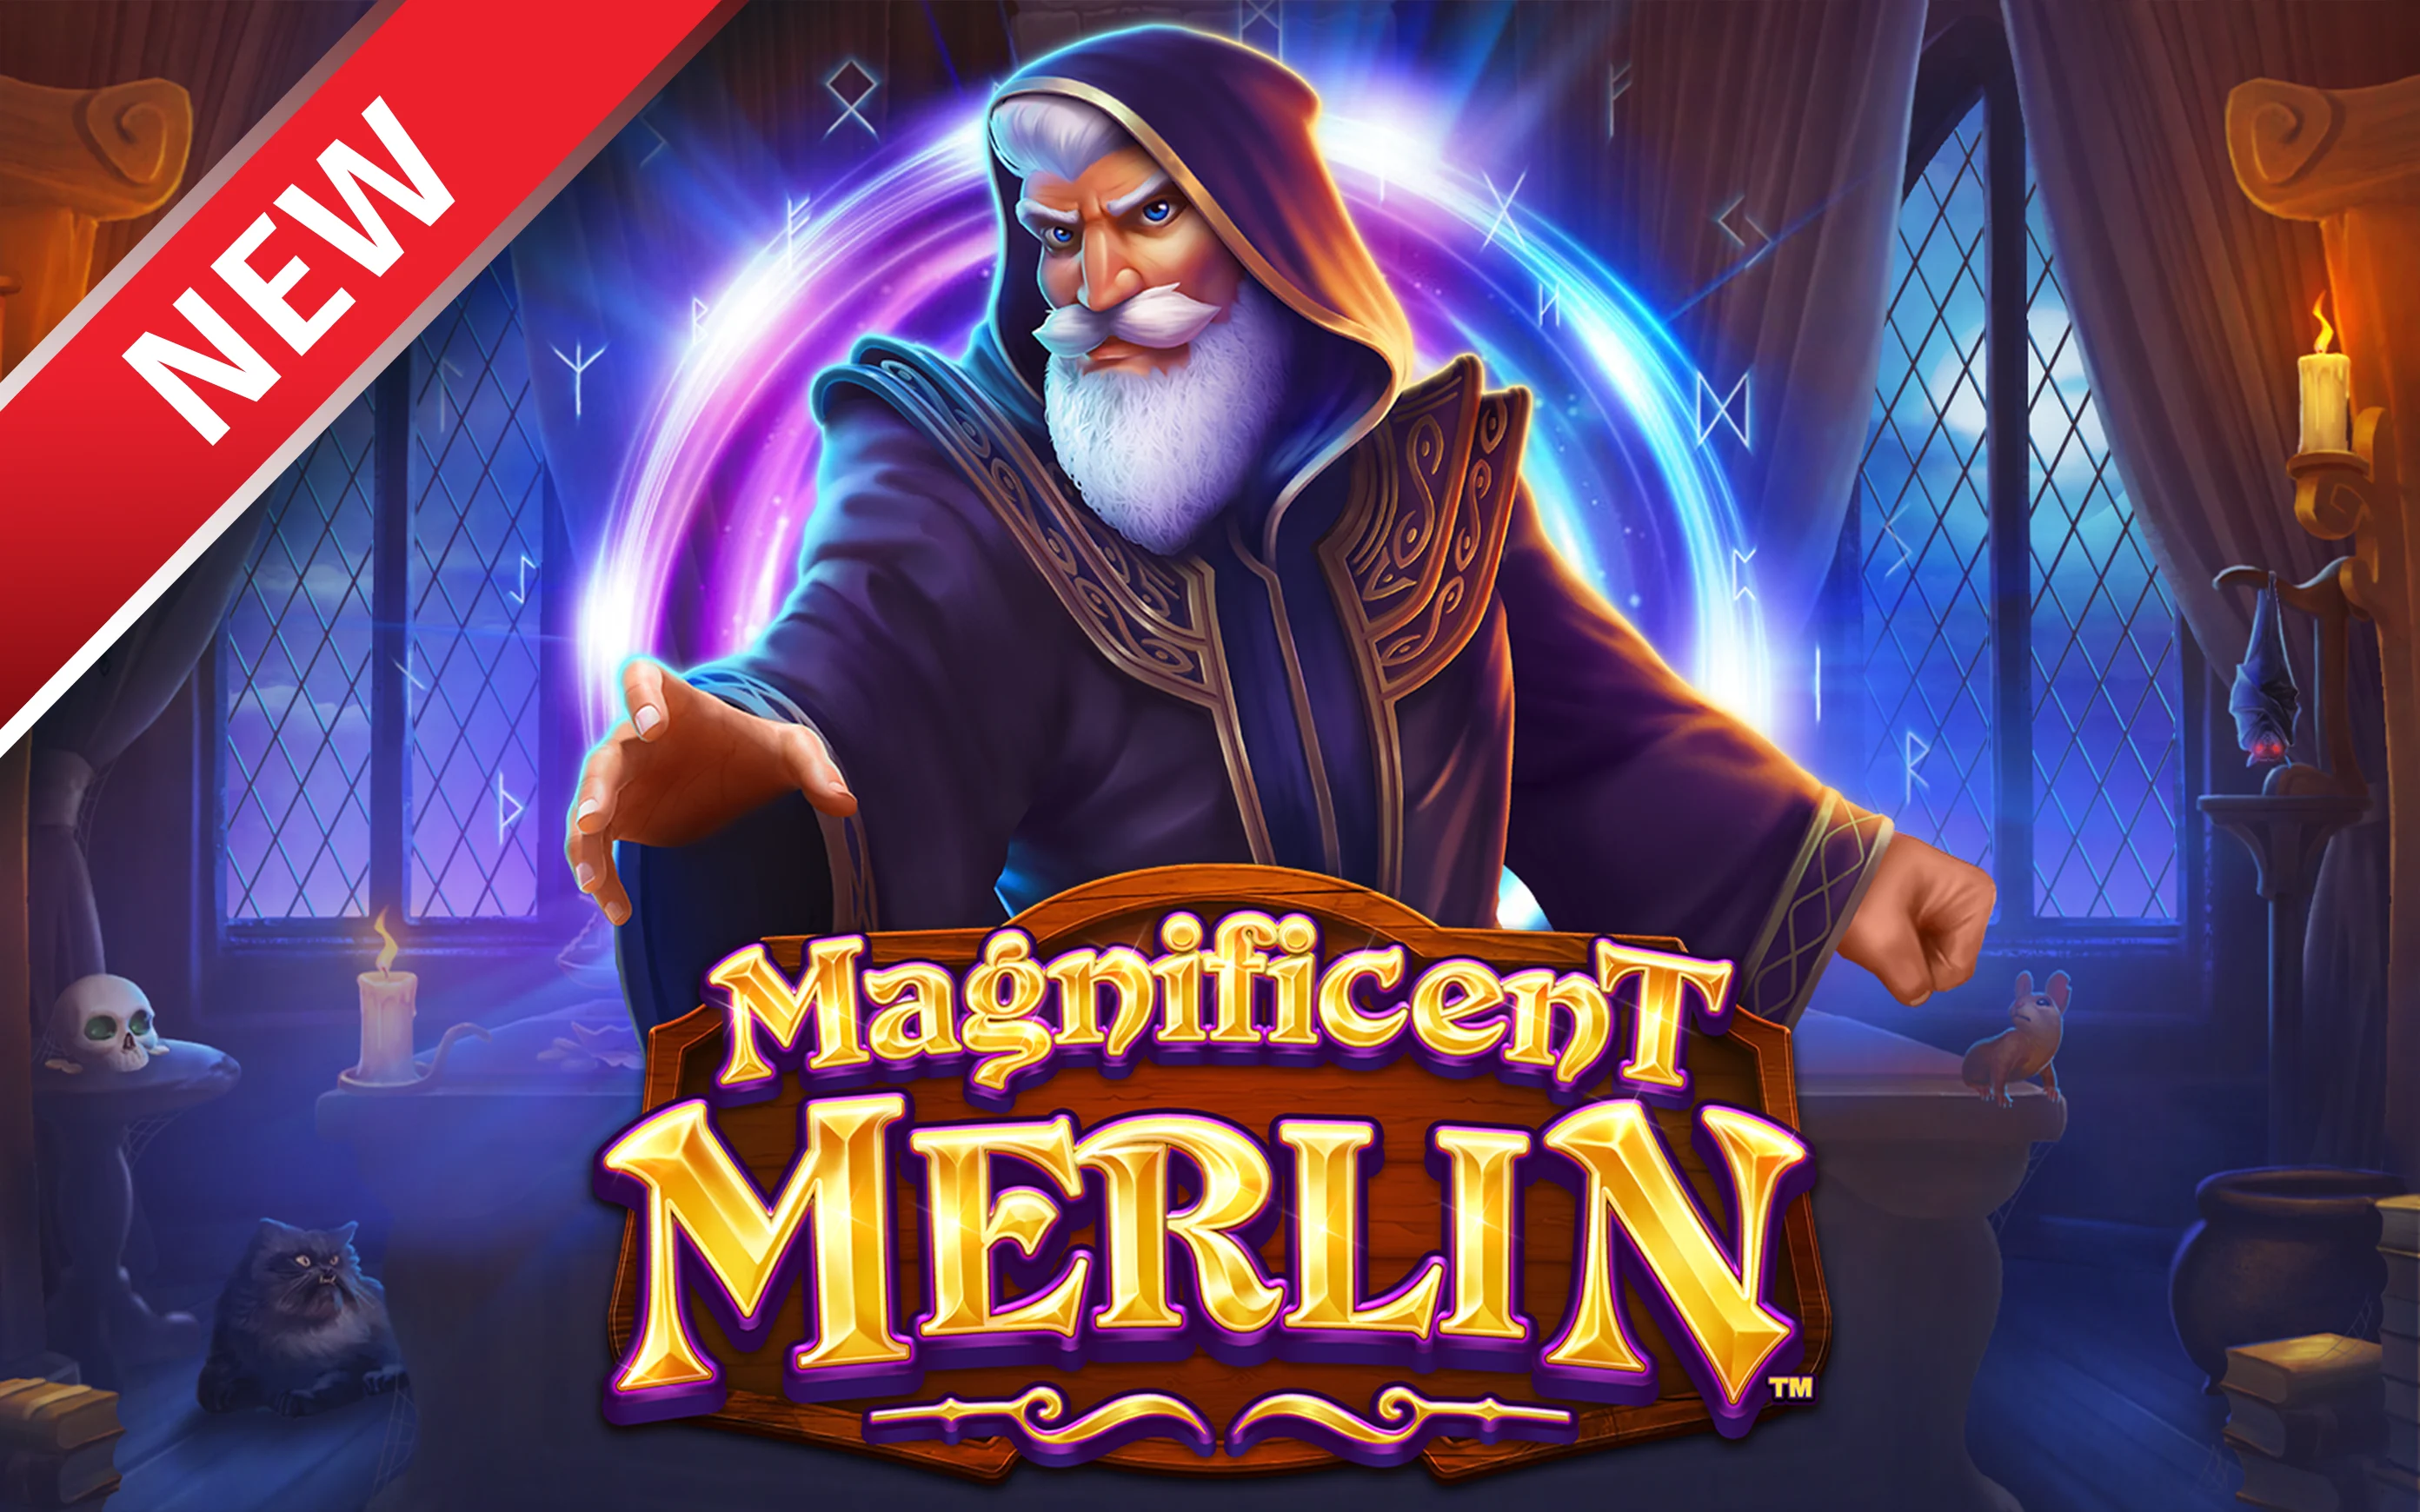 Play Magnificent Merlin™ on Starcasino.be online casino